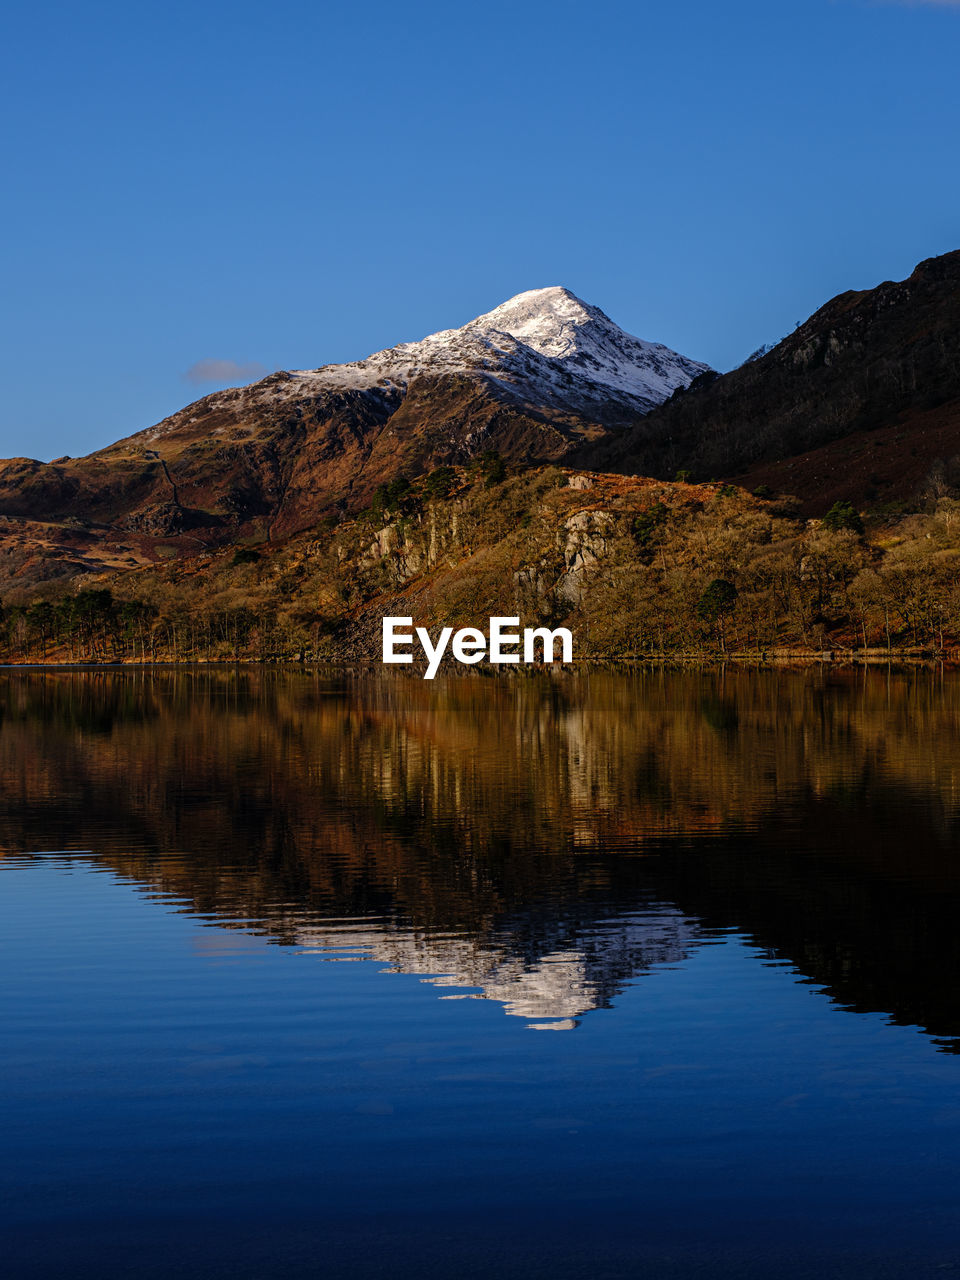 Perfect reflection of snow covered mountains in a lake in snowdonia national park, north wales